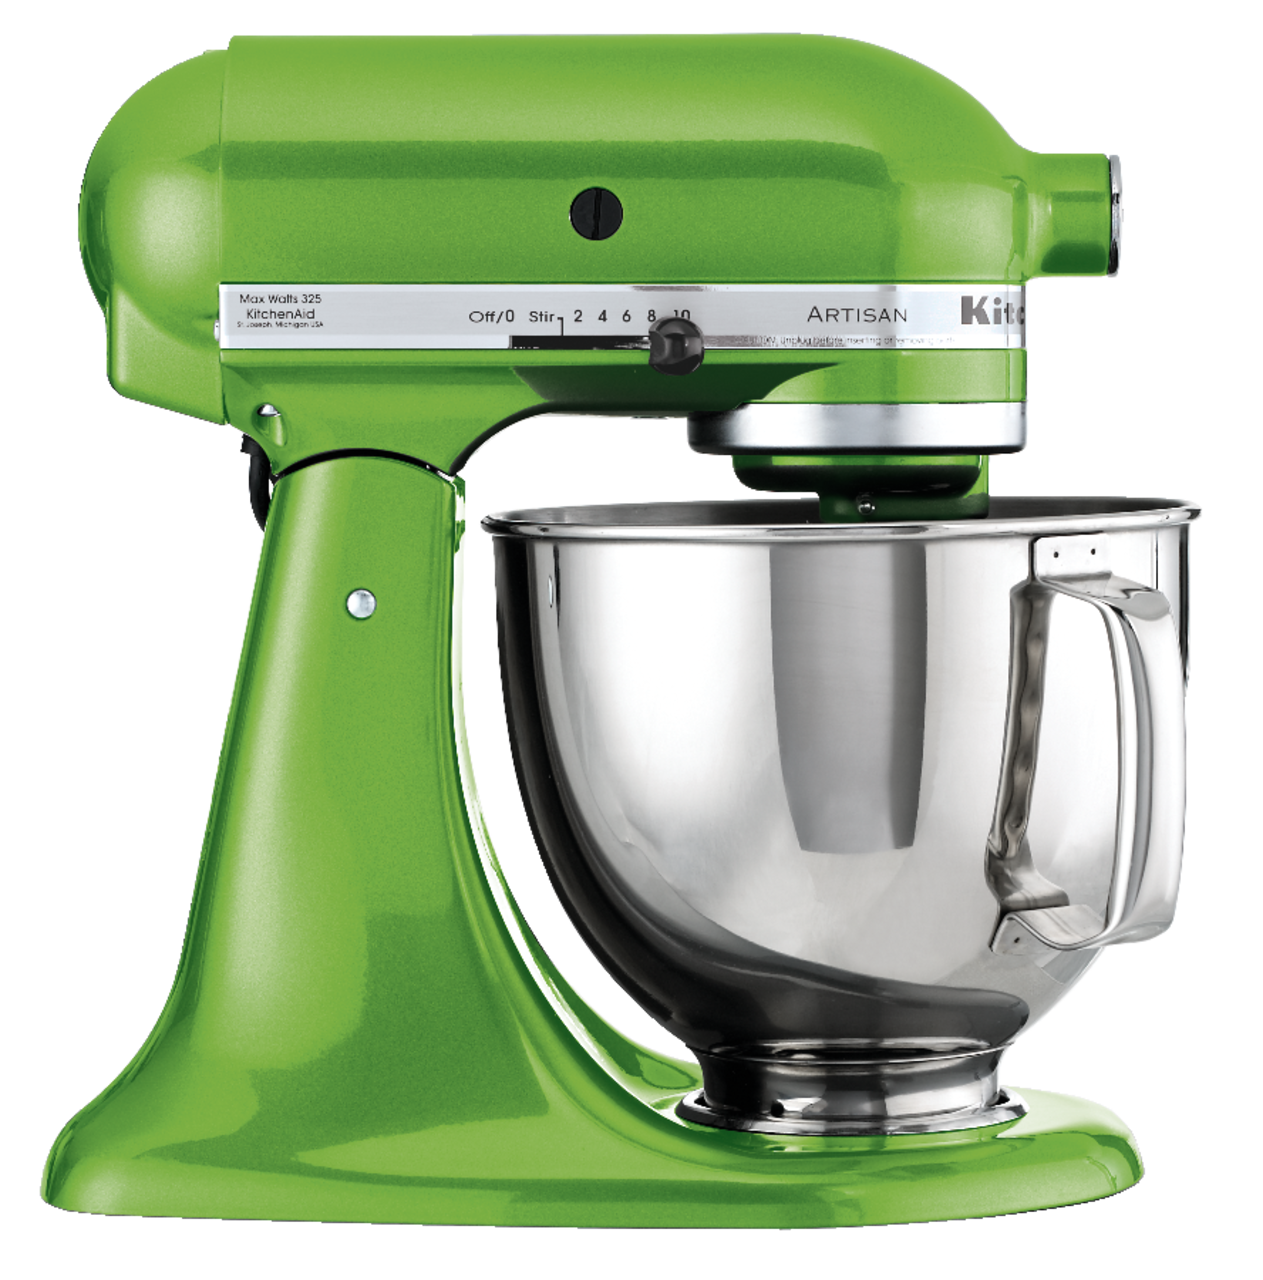 https://media-www.canadiantire.ca/product/living/kitchen/kitchen-appliances/0431407/artisan-stand-mixer-green-apple-60859668-5c86-44f1-b5d9-915dfec020b0.png?imdensity=1&imwidth=640&impolicy=mZoom